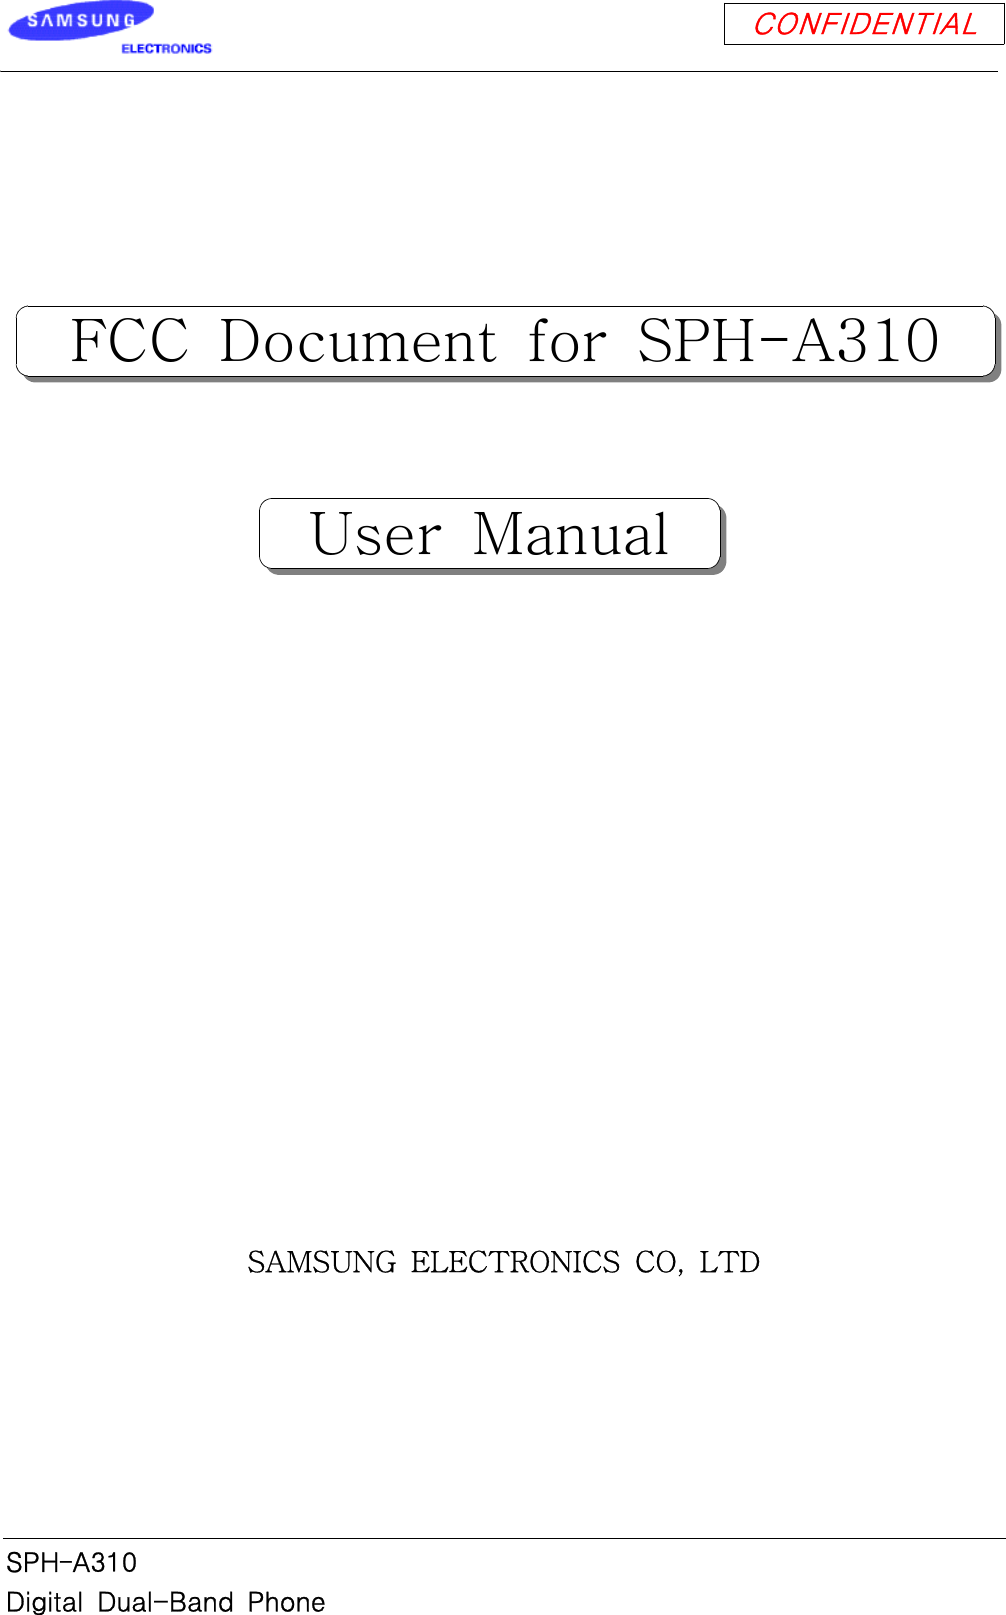 CONFIDENTIALSPH-A310Digital Dual-Band PhoneSAMSUNG ELECTRONICS CO, LTDFCC Document for SPH-A310User Manual